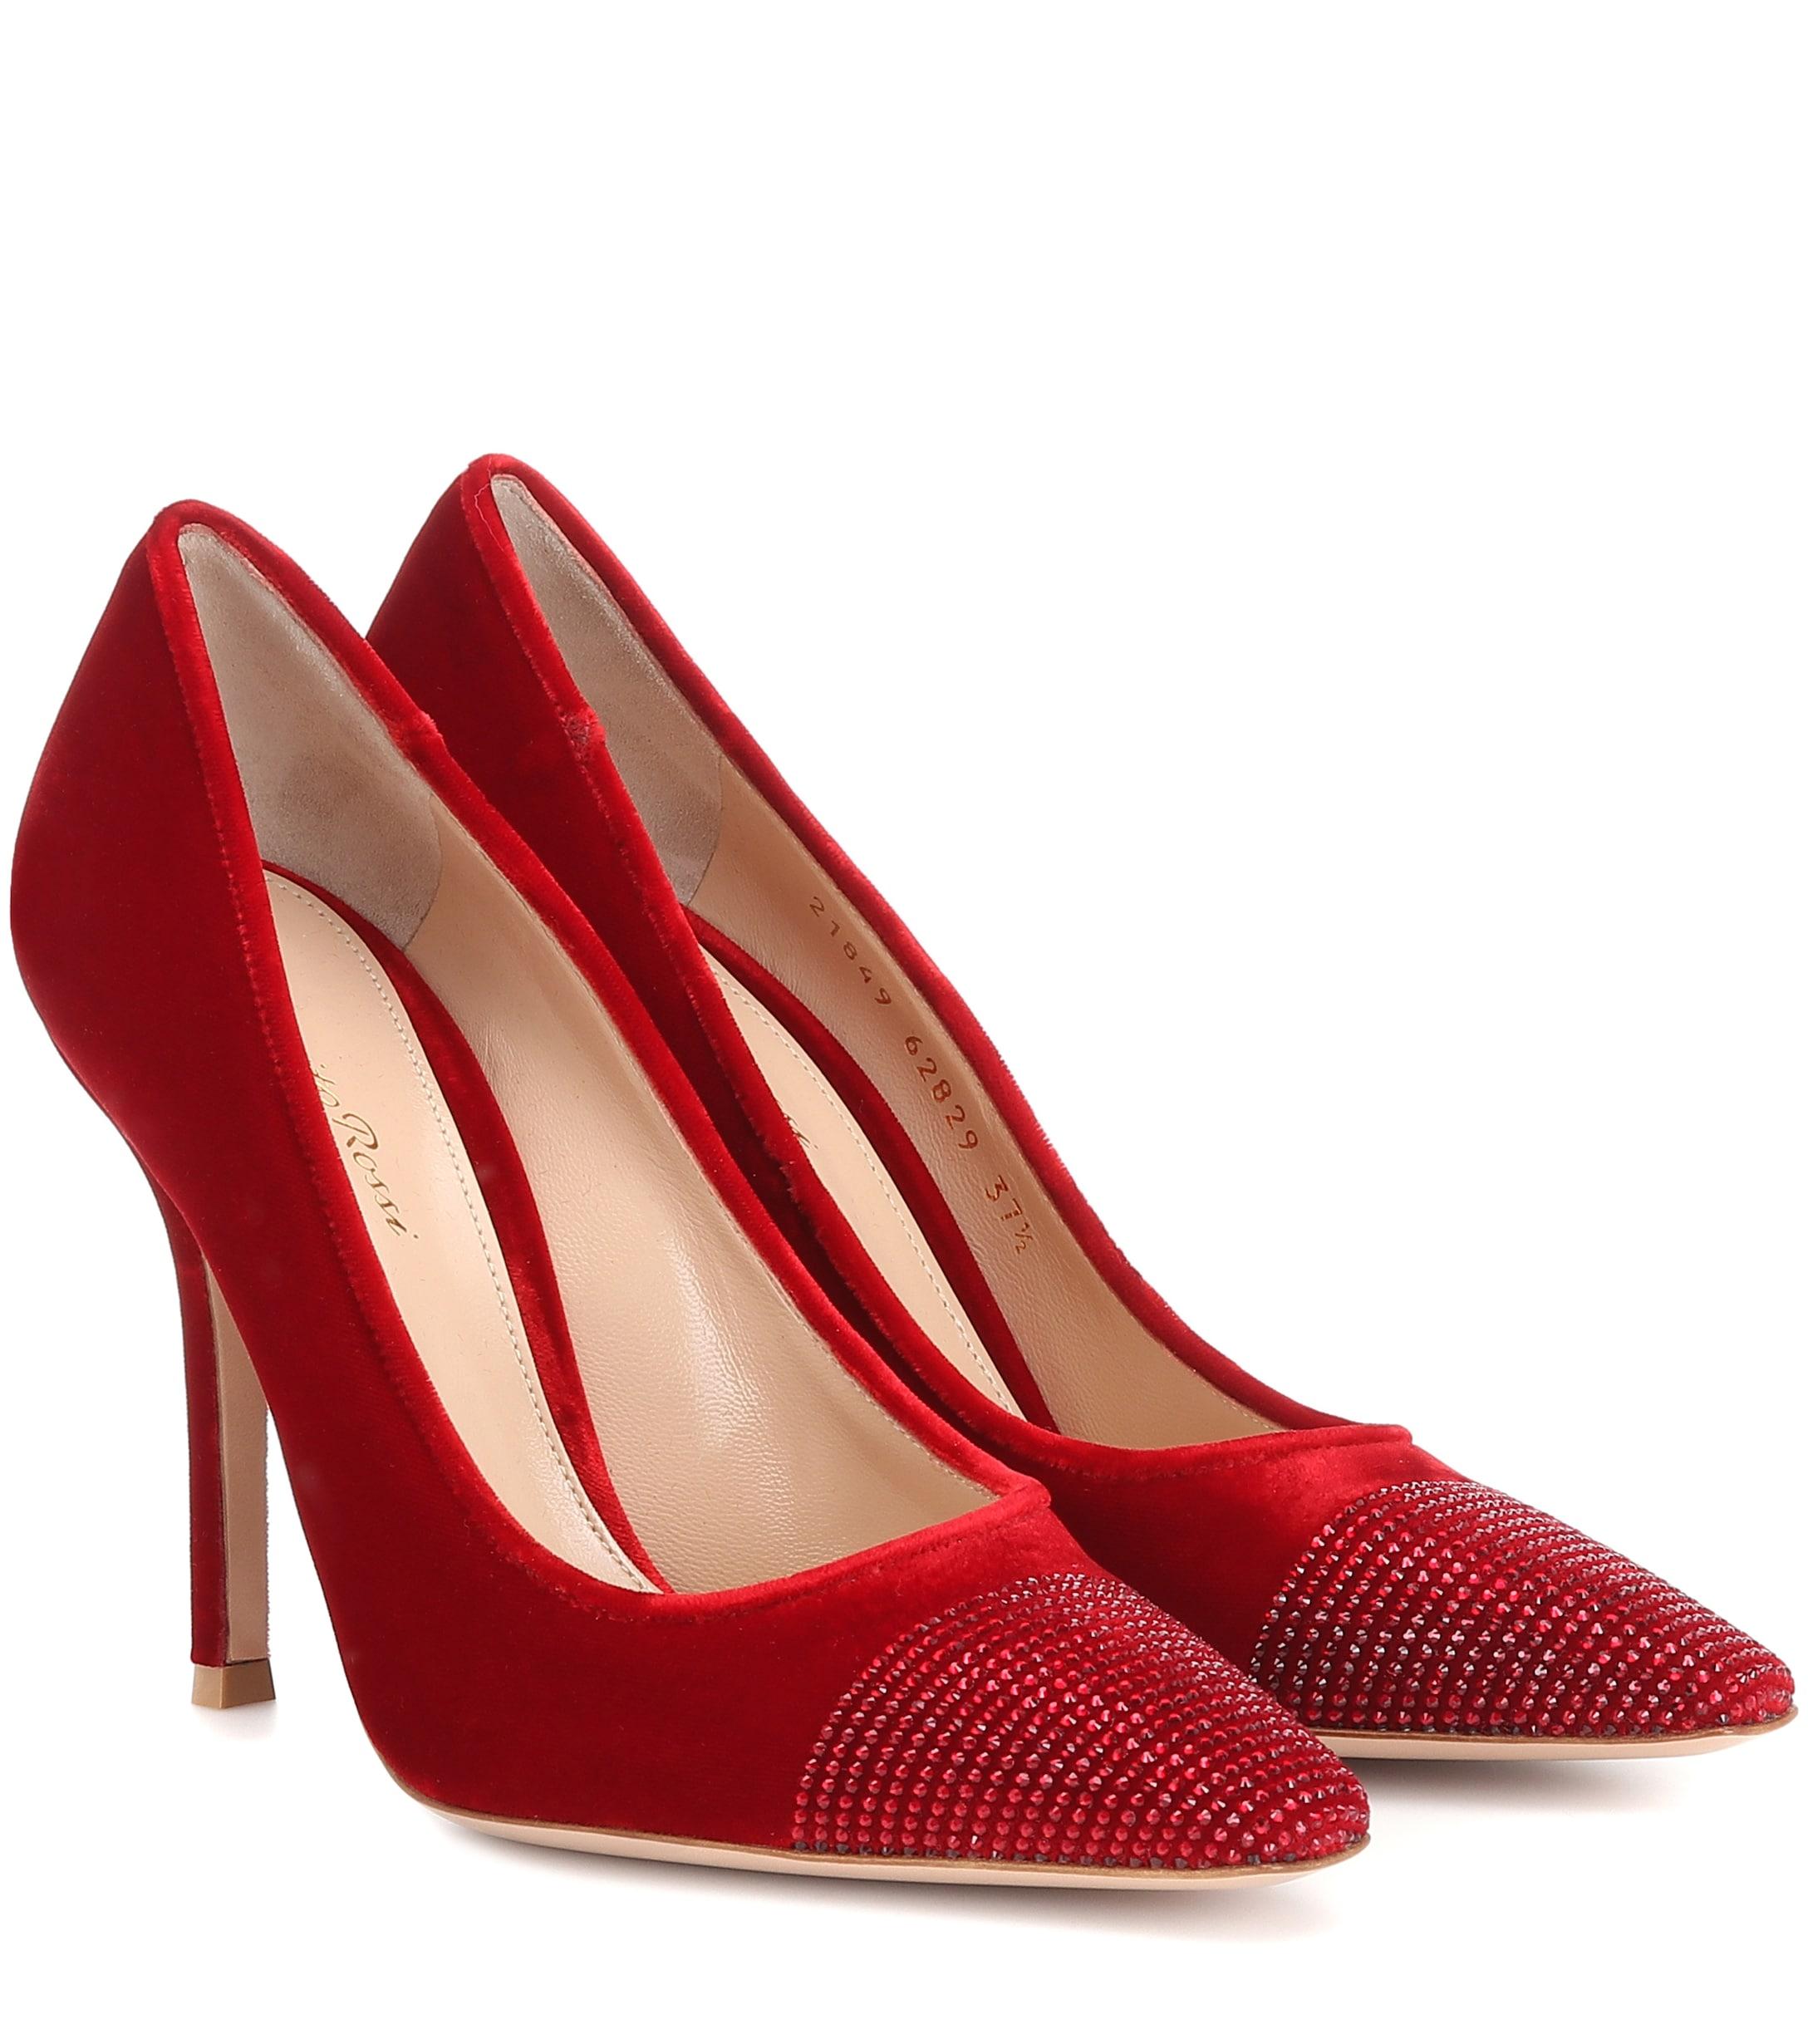 Gianvito Rossi Crystal-embellished Velvet Pumps in Red - Lyst